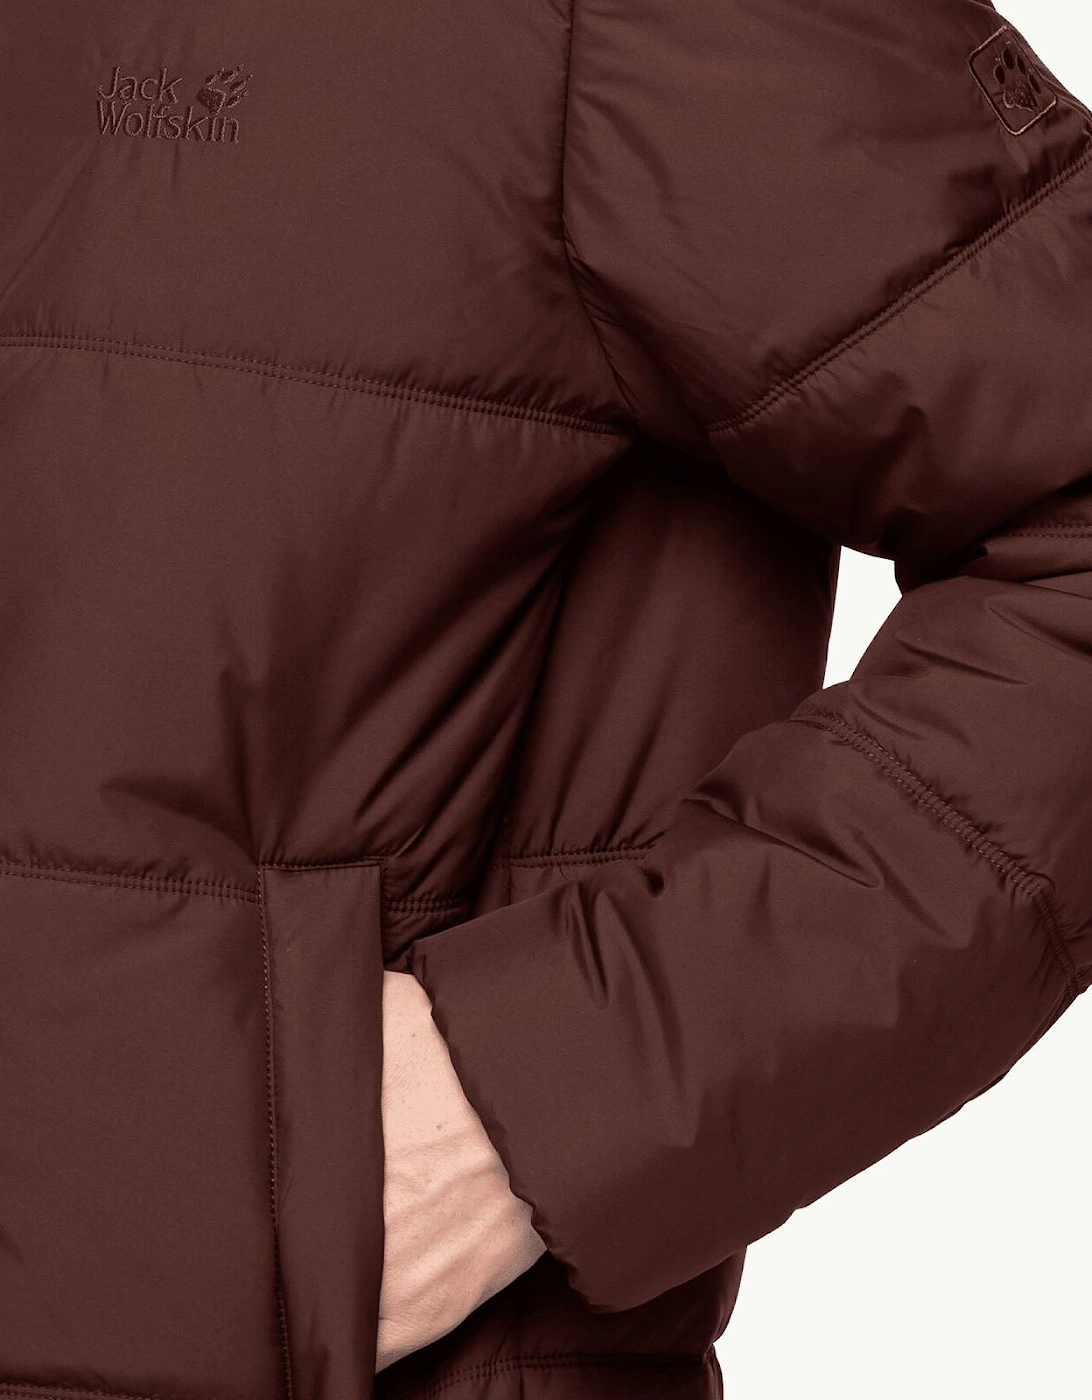 Mens North York Windproof Insulated Jacket